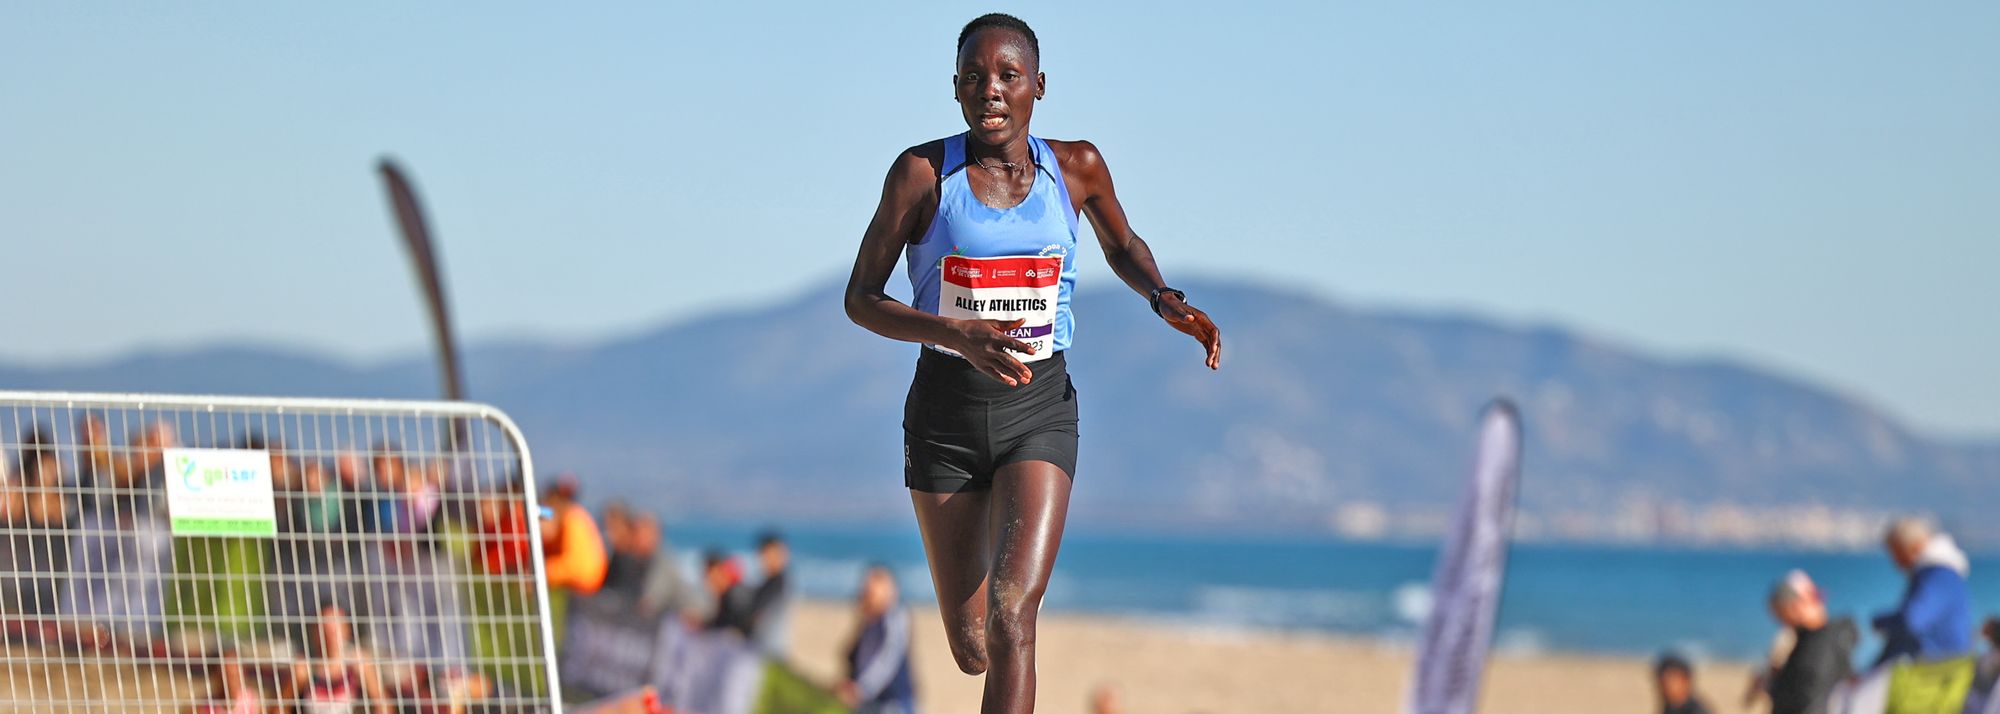 Athlete Refugee Team member Angelina Nadai Lohalith claimed a shock win at the European Champion Clubs Cup Cross Country in Castellon